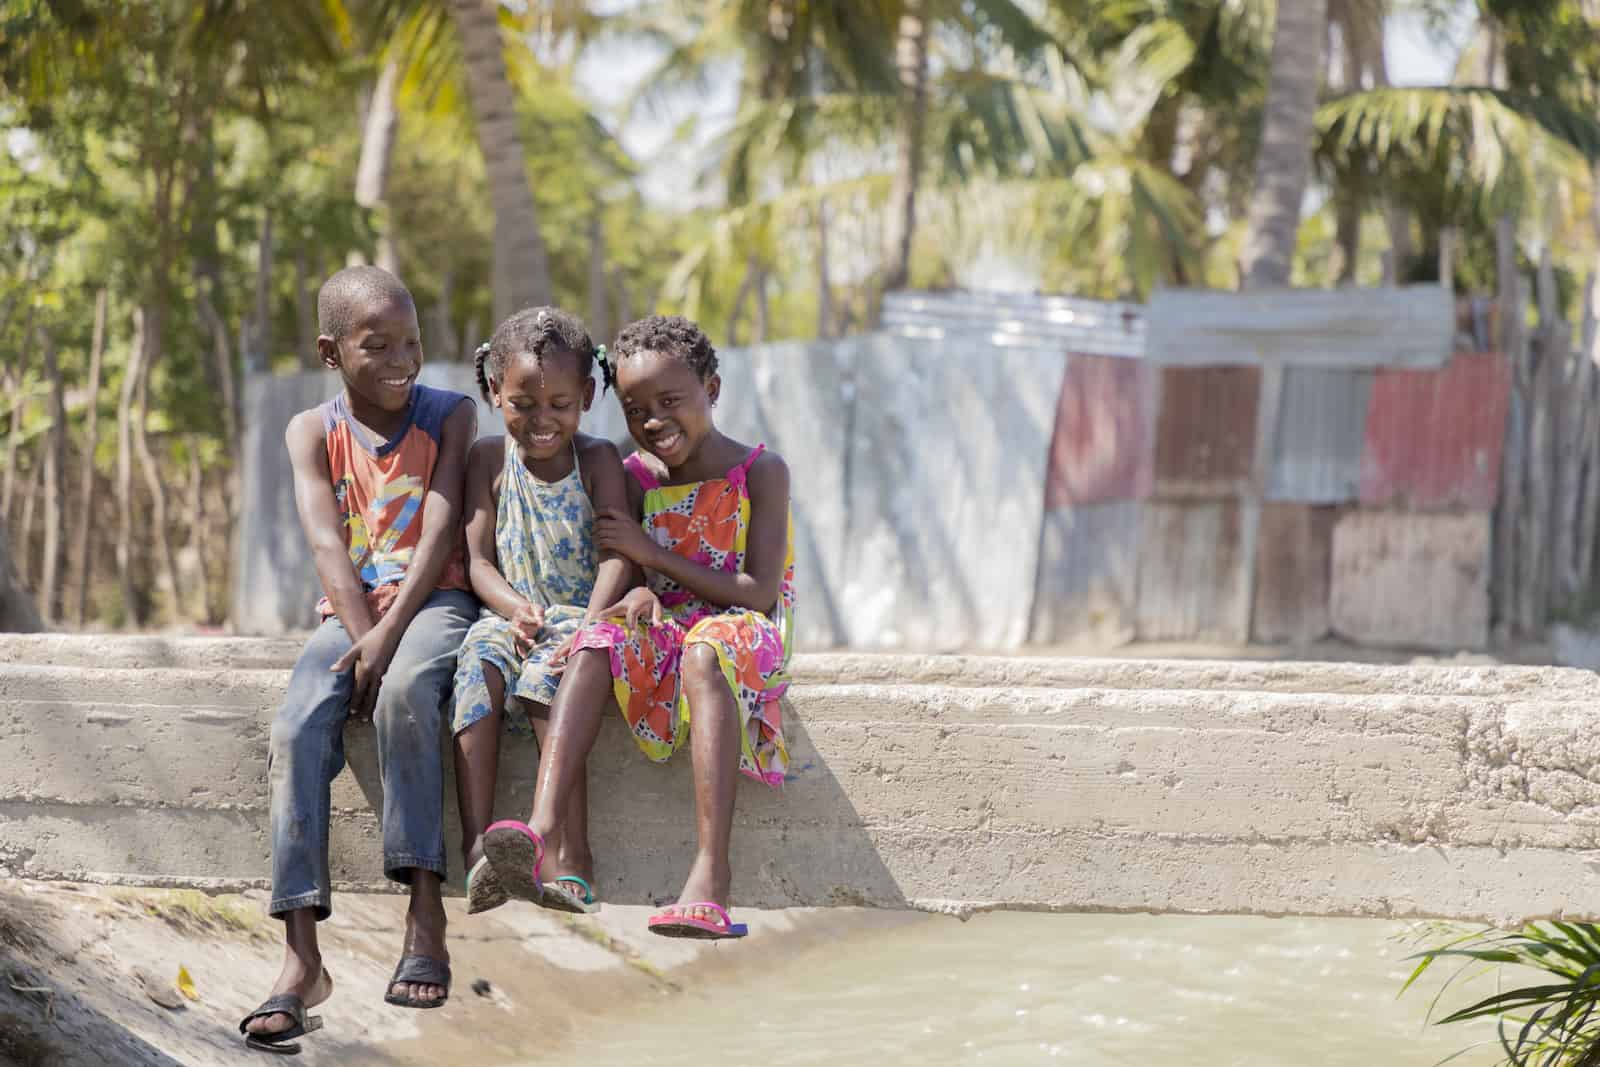 Three young children sit on a concrete beam that is a bridge across a ditch full of water. In the background are palm trees and corrugated metal sheet homes.